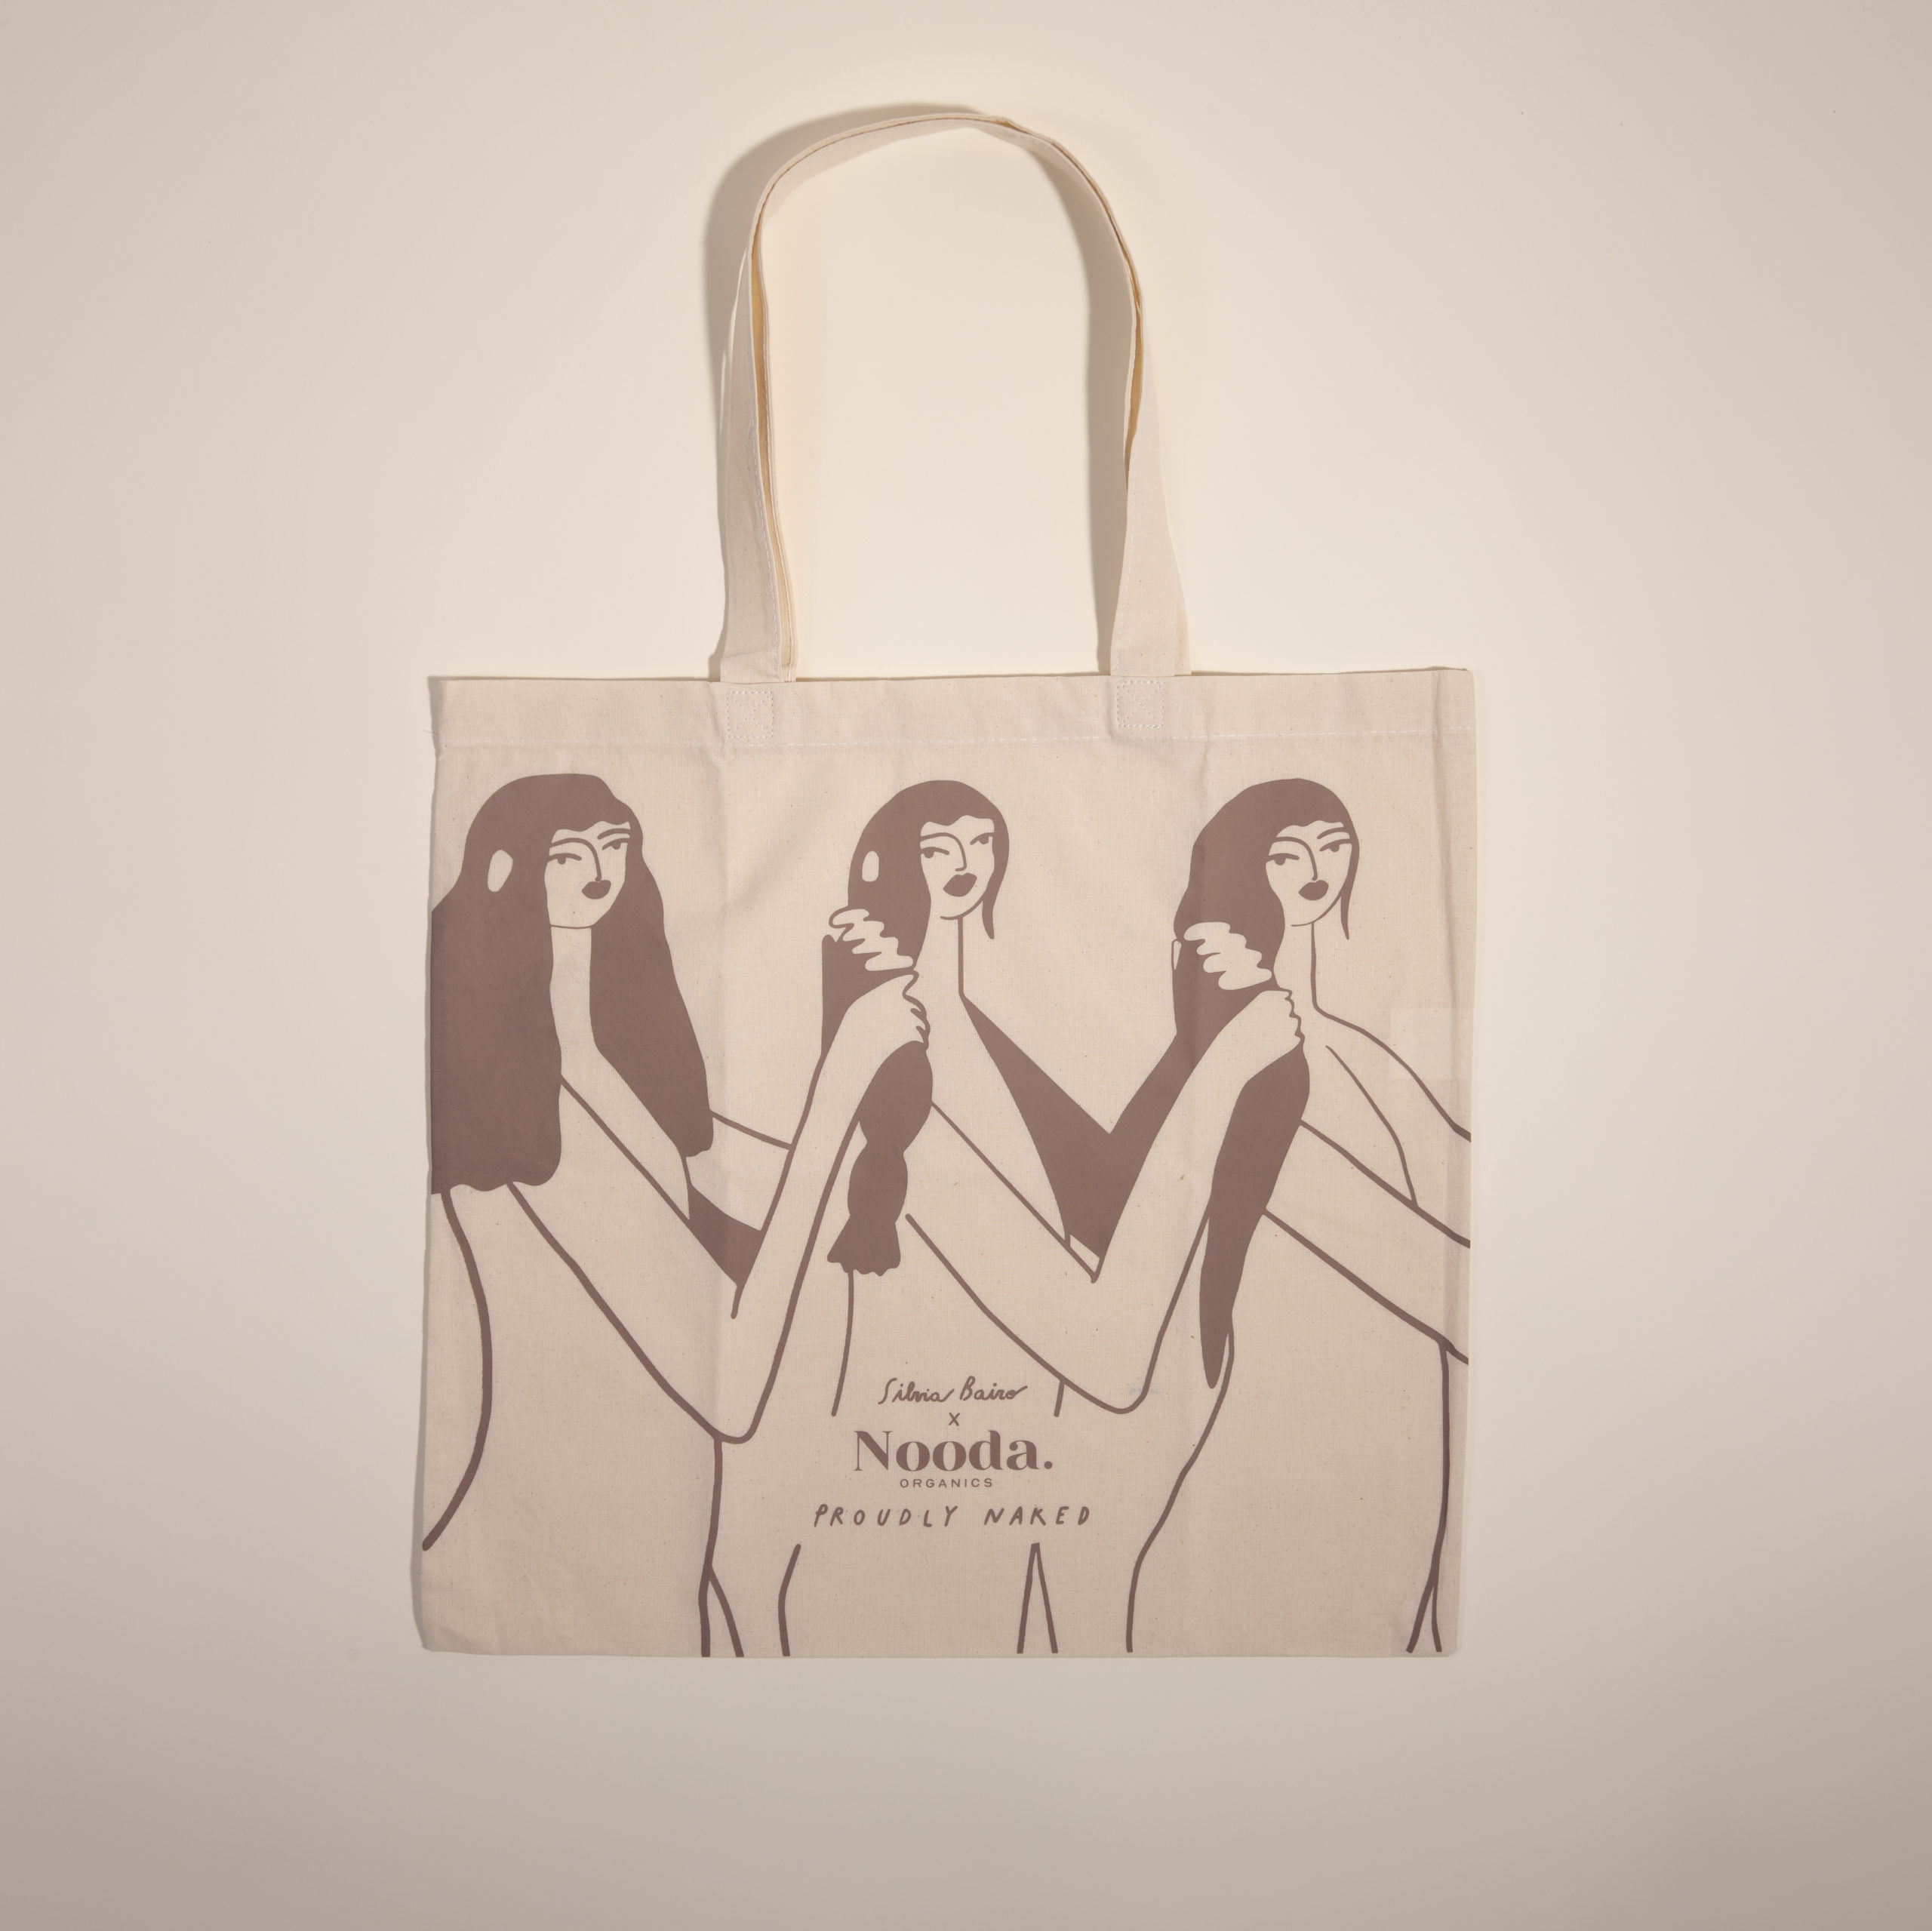 Proudly Naked tote bag